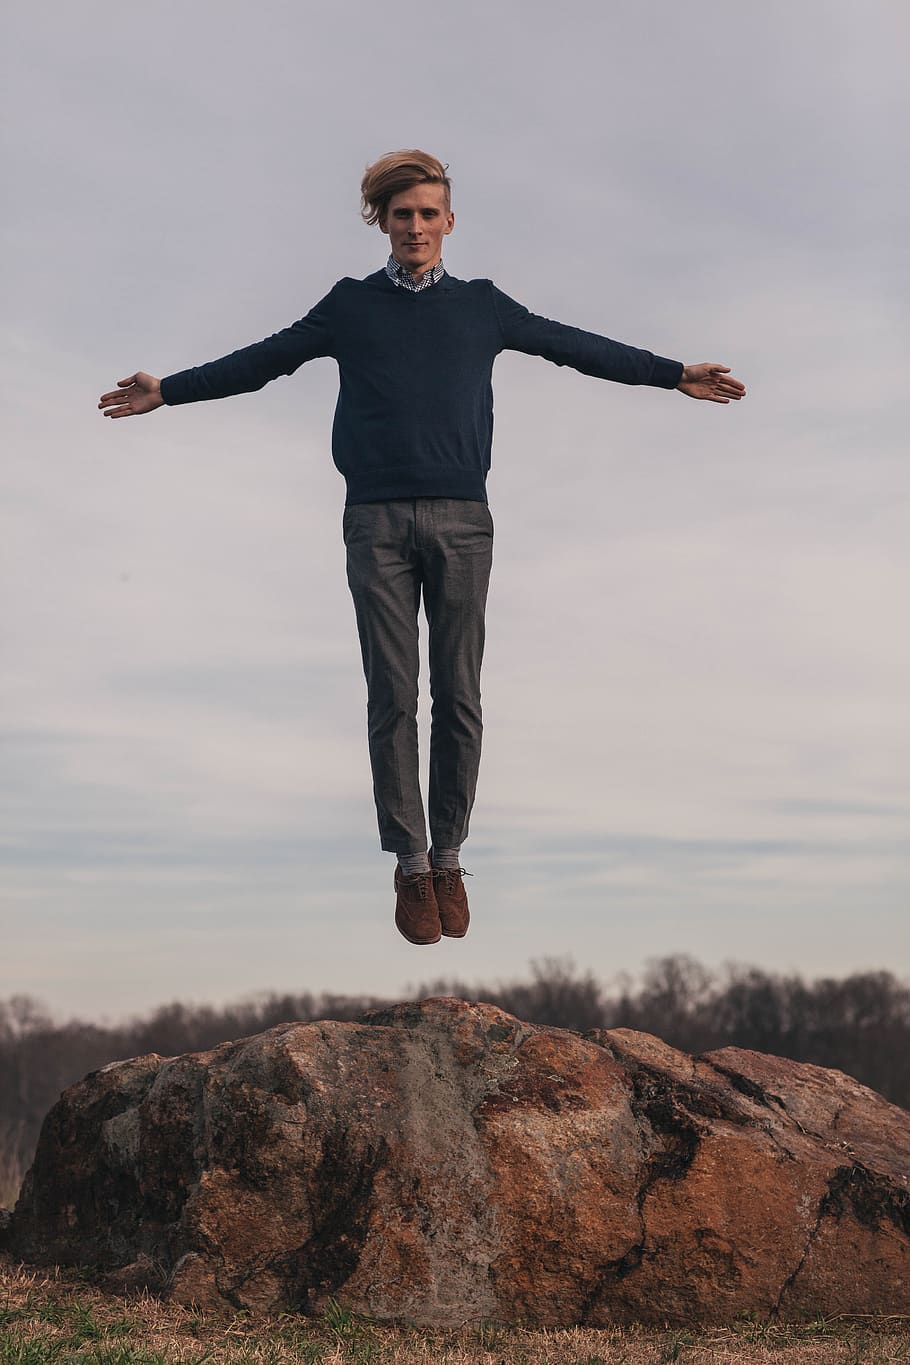 jump, levitate, man, model, rock, one person, full length, young men, leisure activity, lifestyles